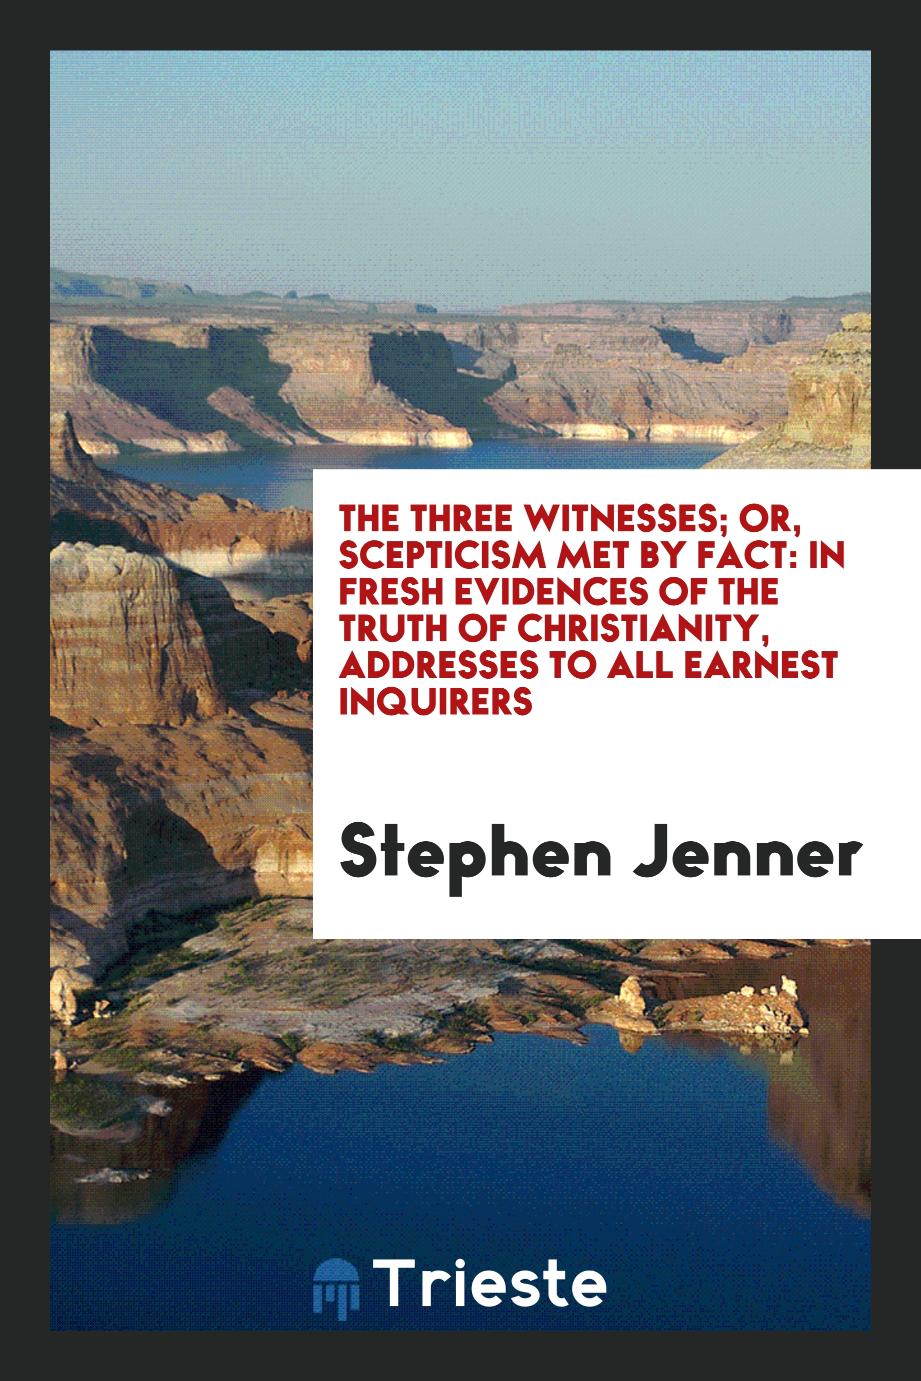 The three witnesses; or, scepticism met by fact: in fresh evidences of the truth of Christianity, addresses to all earnest inquirers